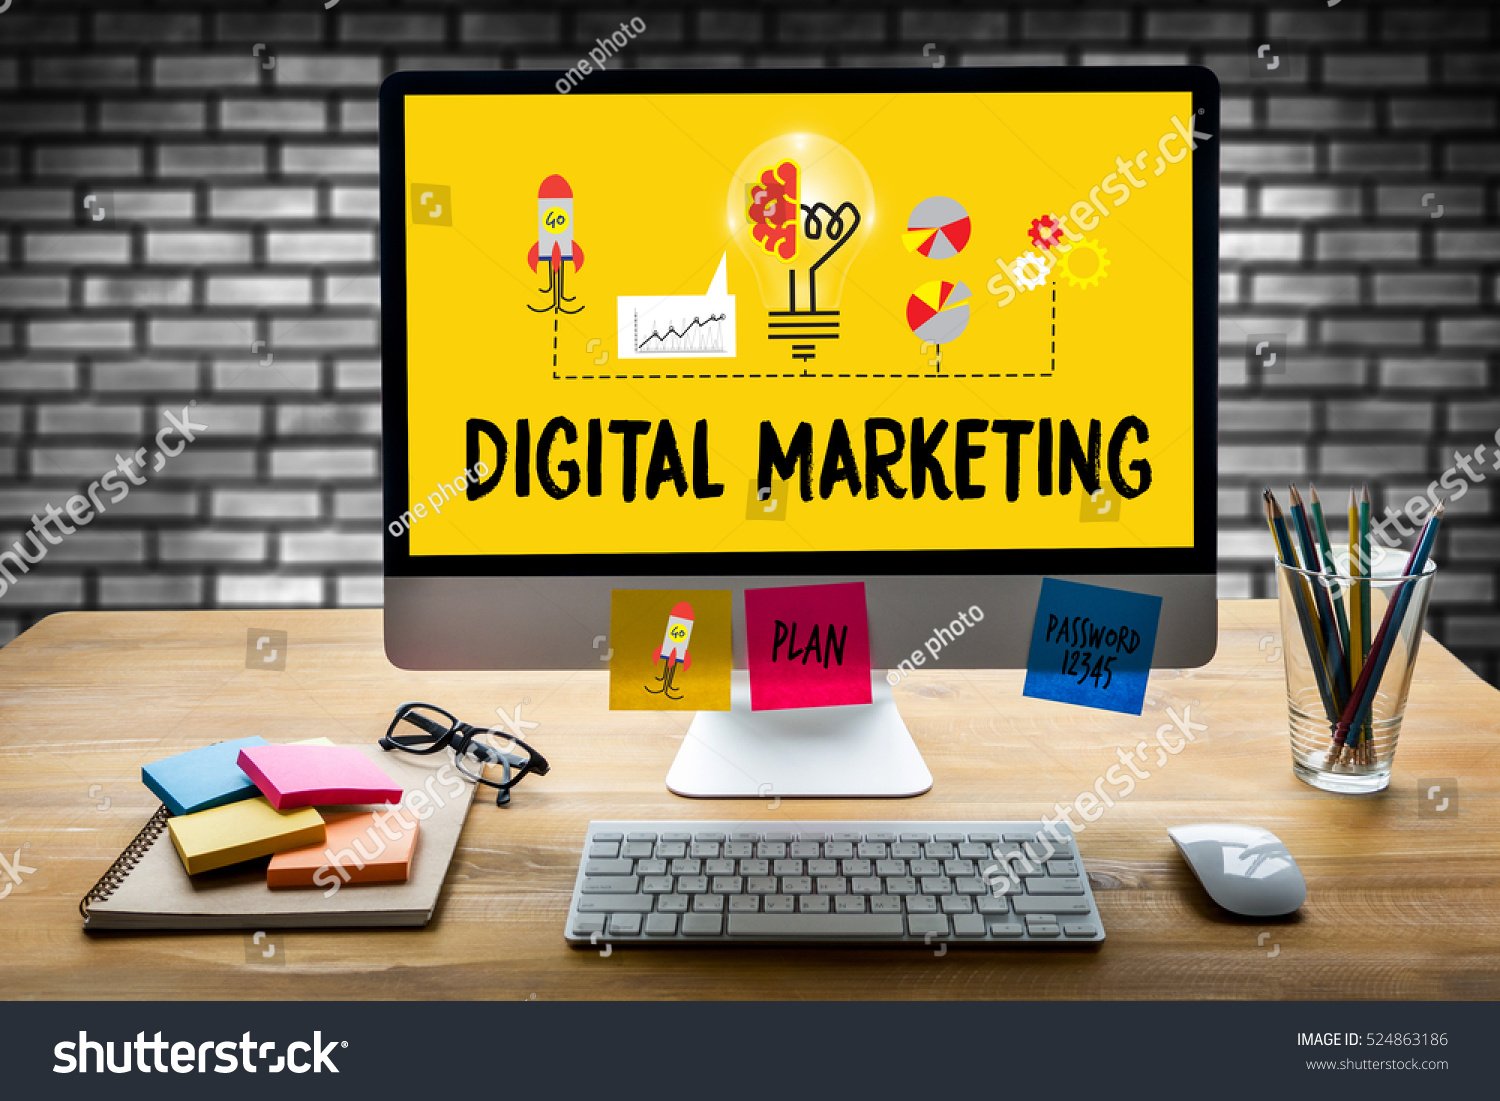 stock-photo-digital-marketing-new-startup-project-work-analysing-and-advertisement-man-brainstorming-to-seo-524863186